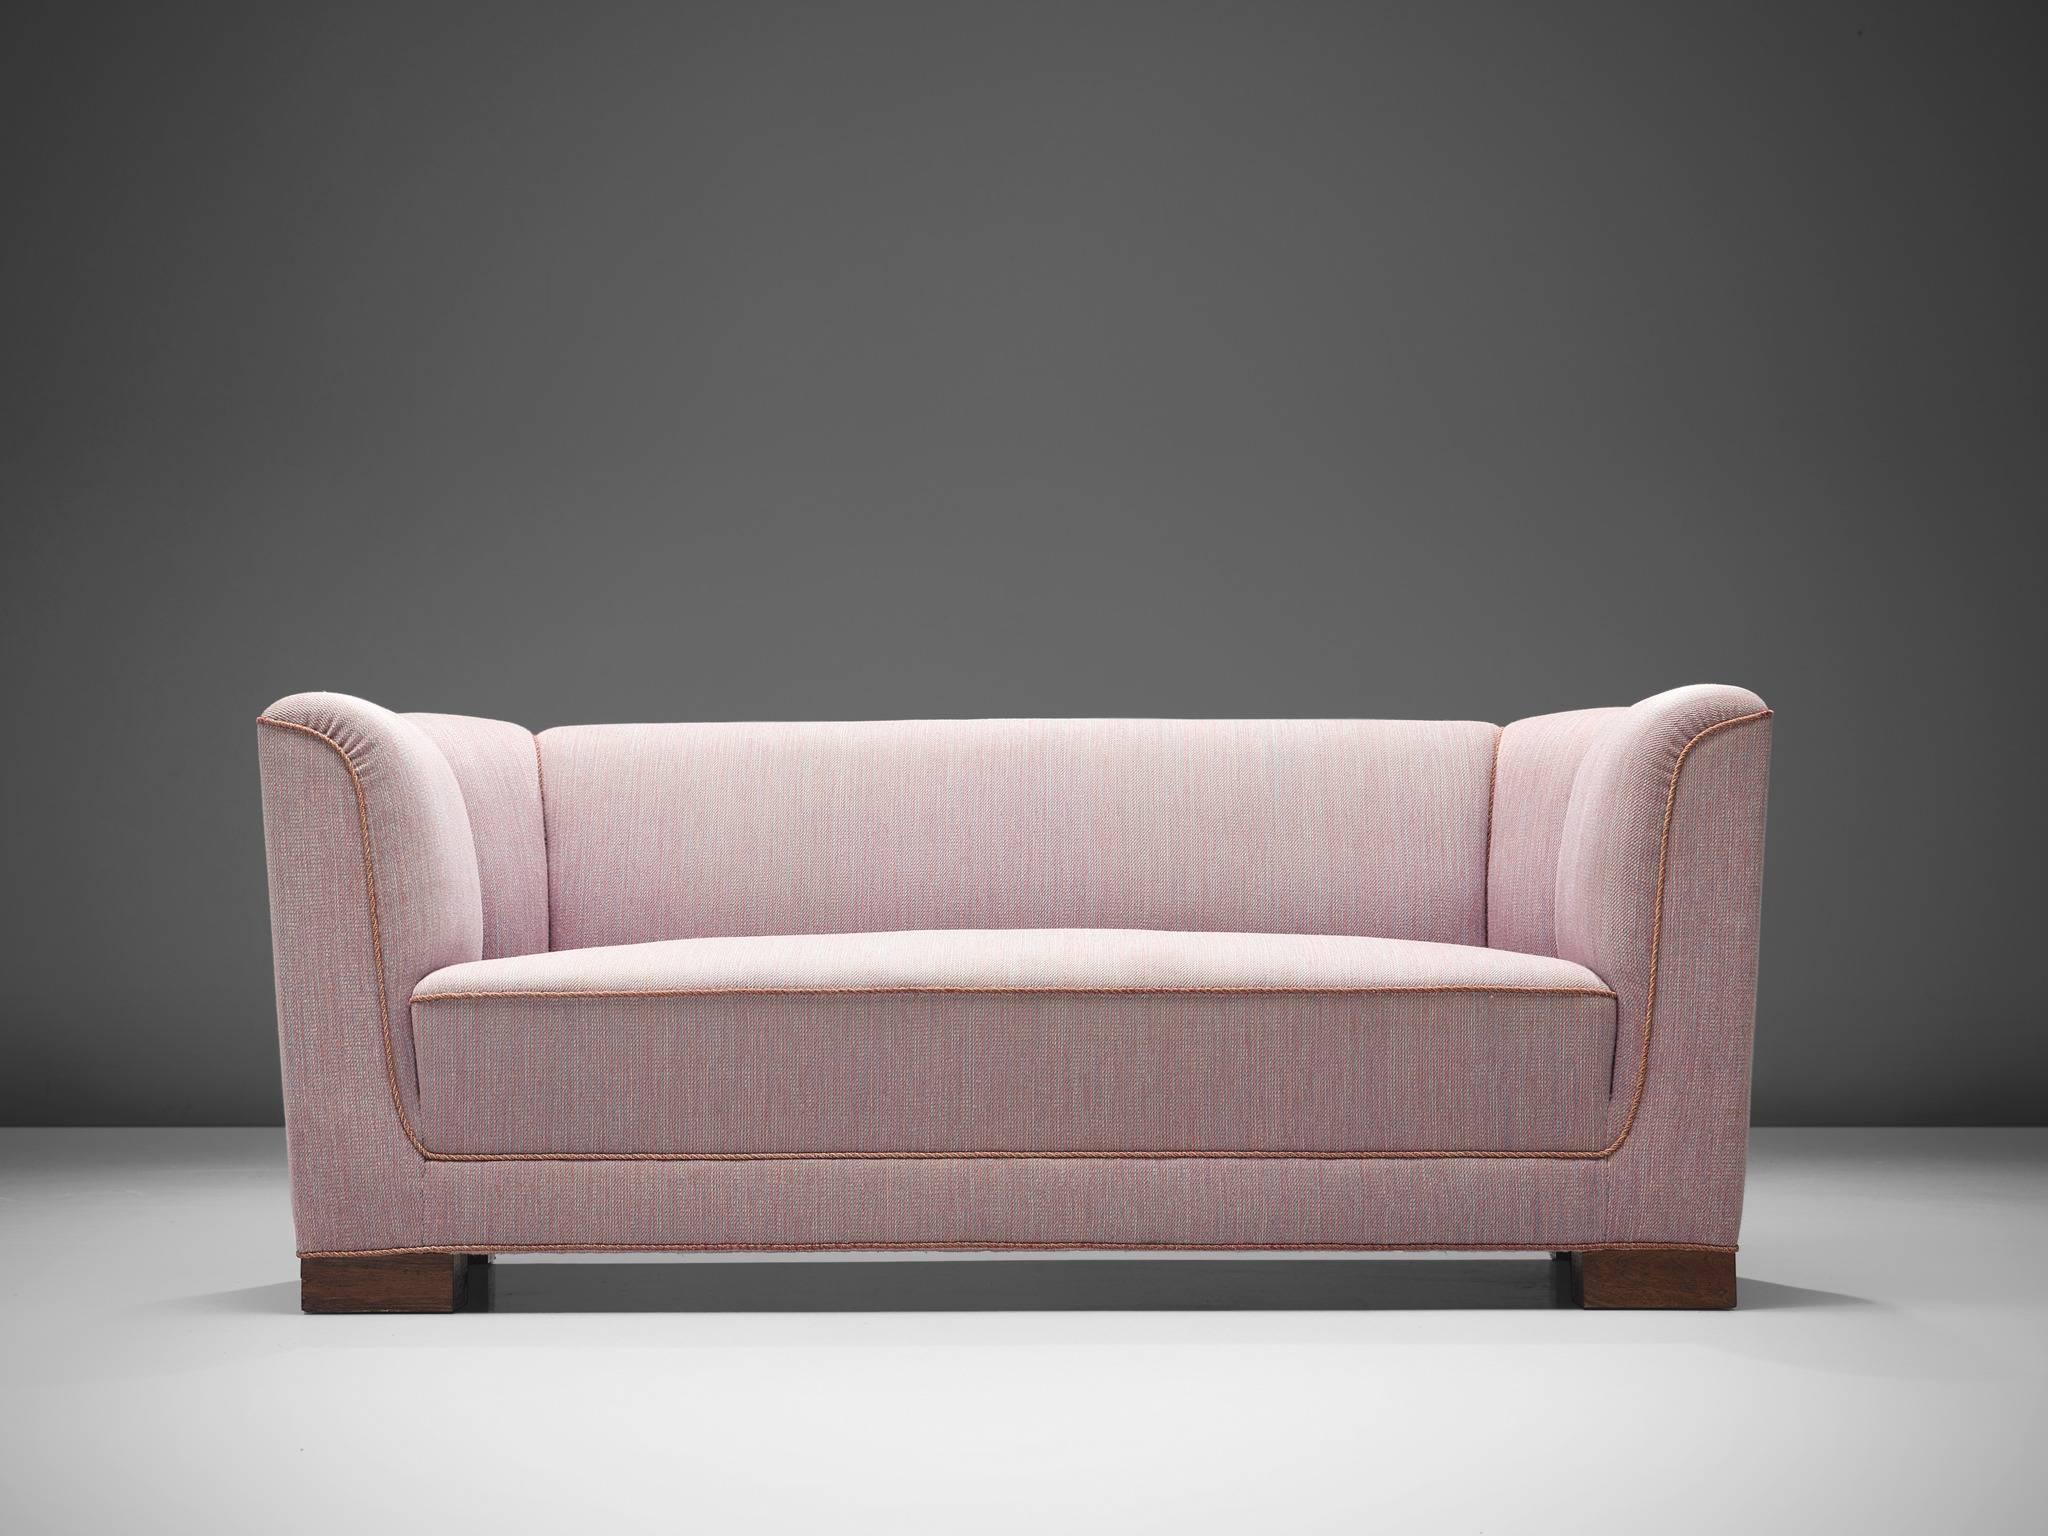 Danish cabinetmaker, three-seat sofa, pink wool, rosewood, Denmark, 1950s.

Simplistic and strong Danish sofa with clean lines and a high back. The sofa features thick, veneered rosewood legs. The piece is thick and comfortable and is finished